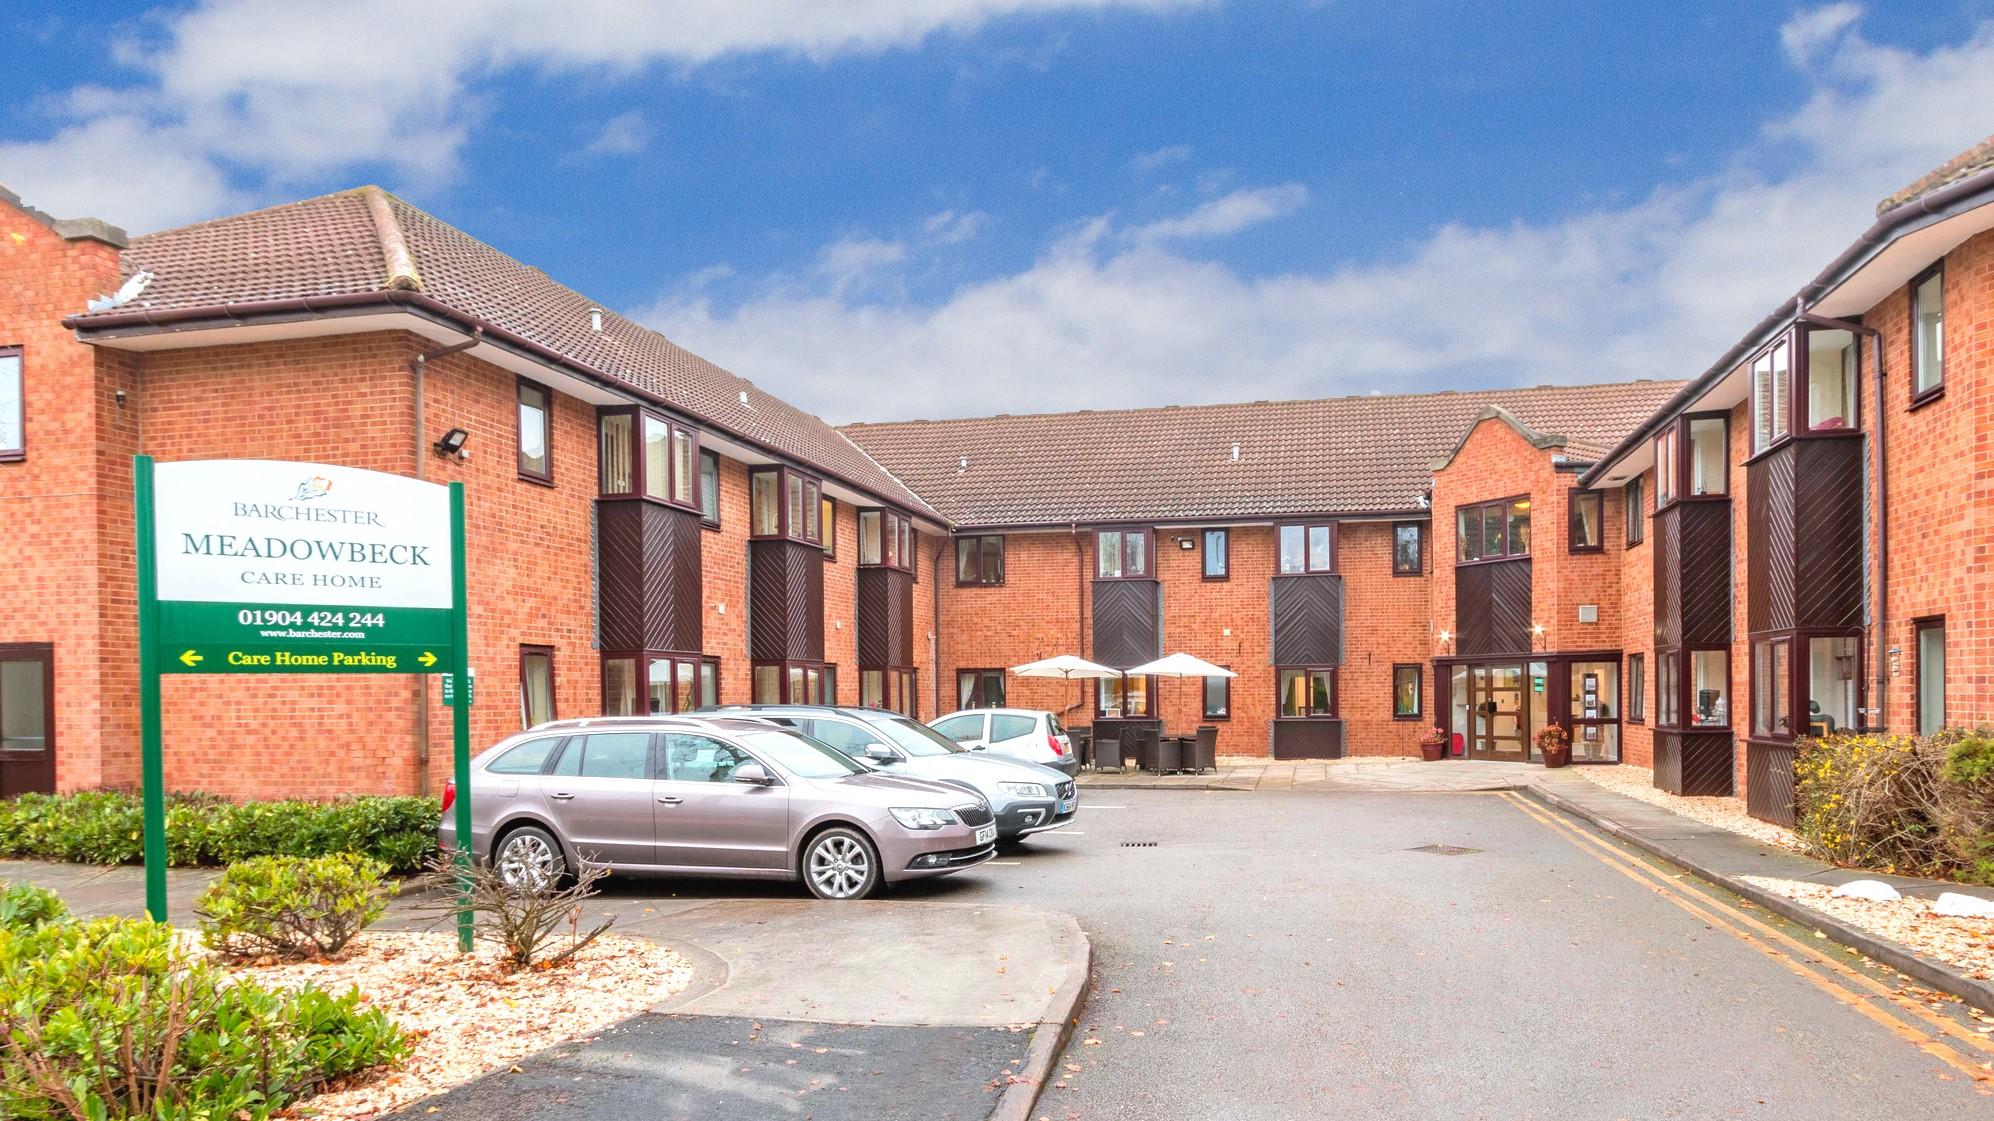 Meadowbeck Care Home